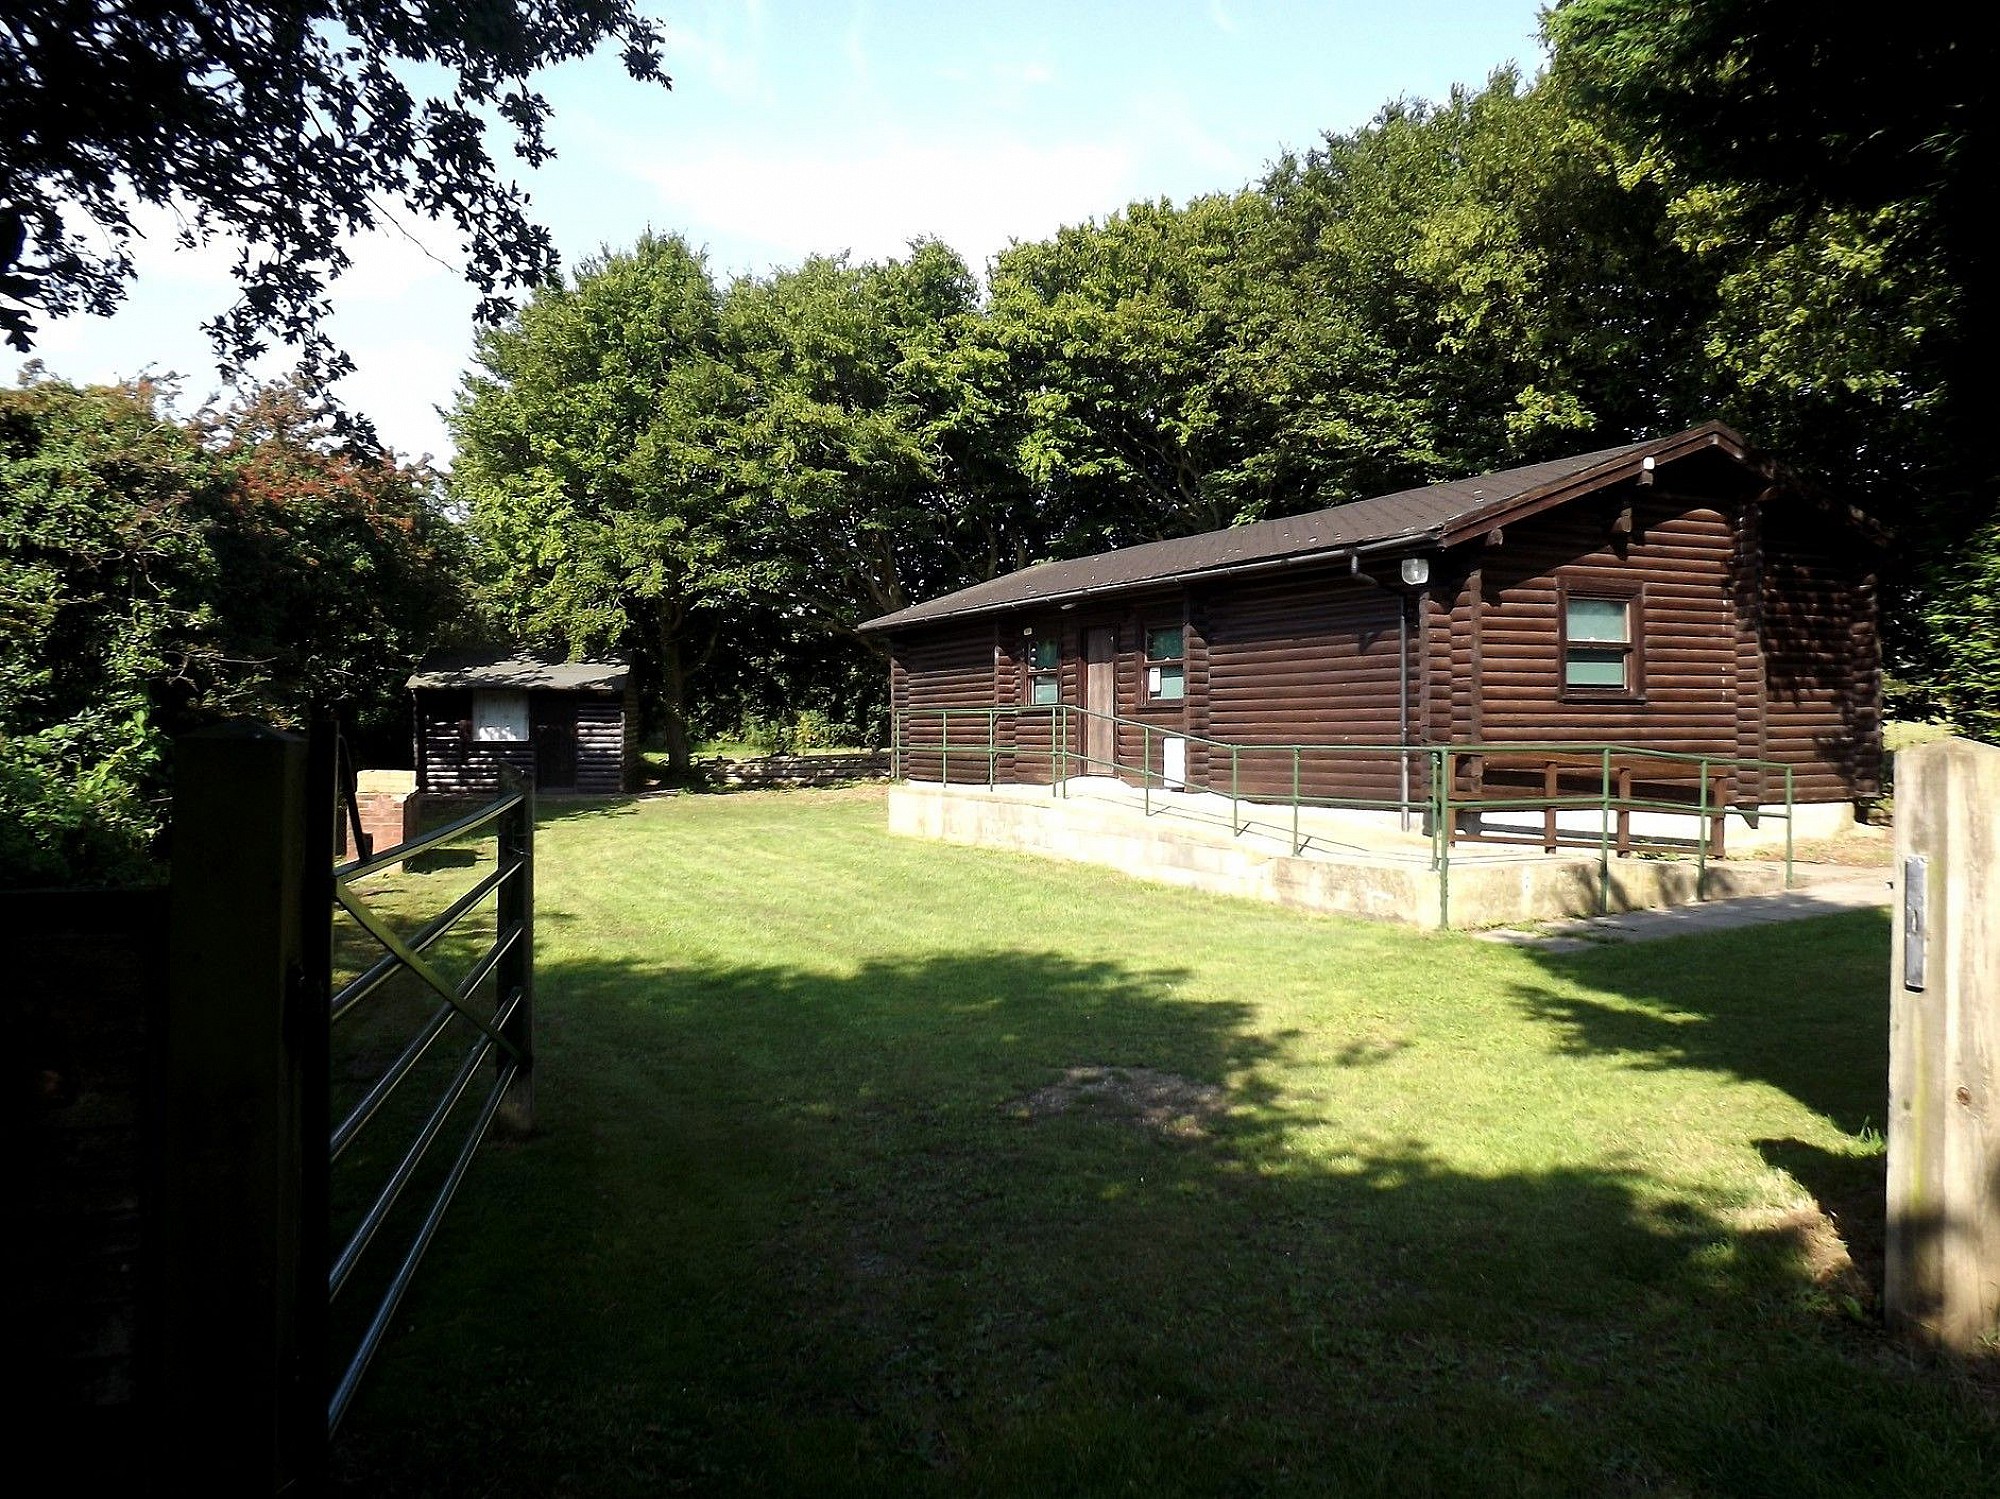 Trimingham Log Cabin to re-open from May 2021